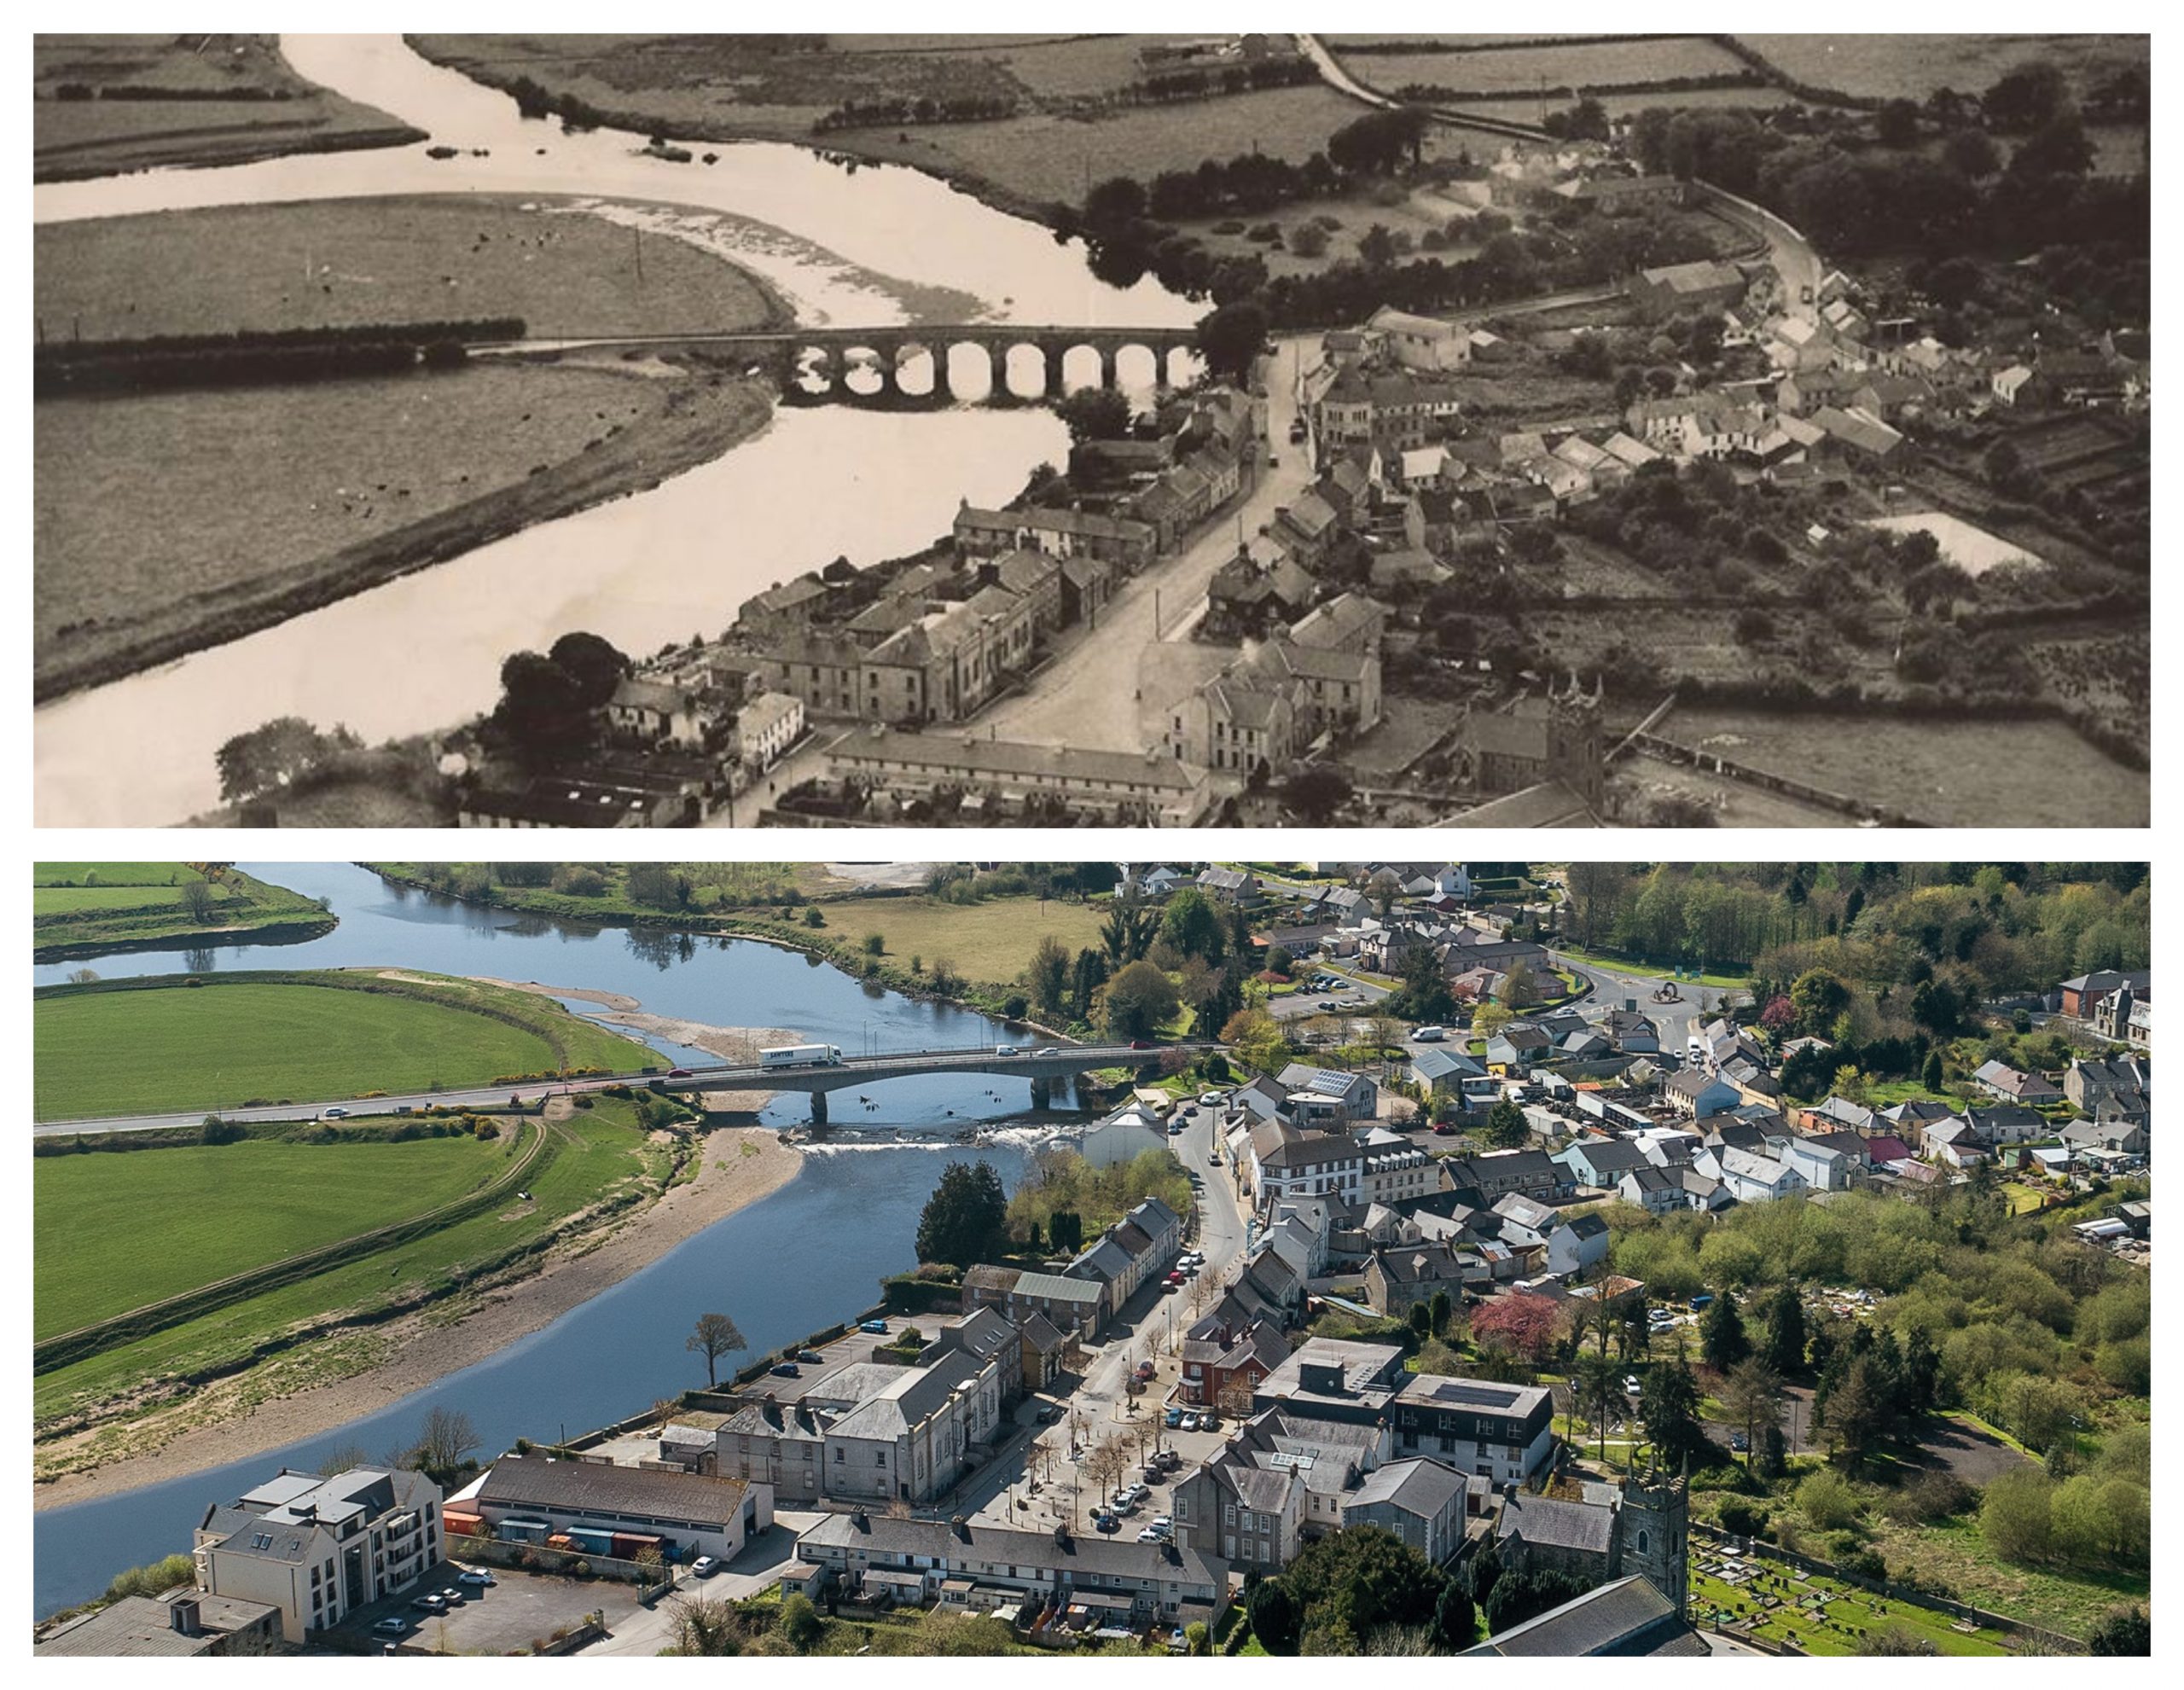 Pictures taken 70 years apart reveal town’s growth